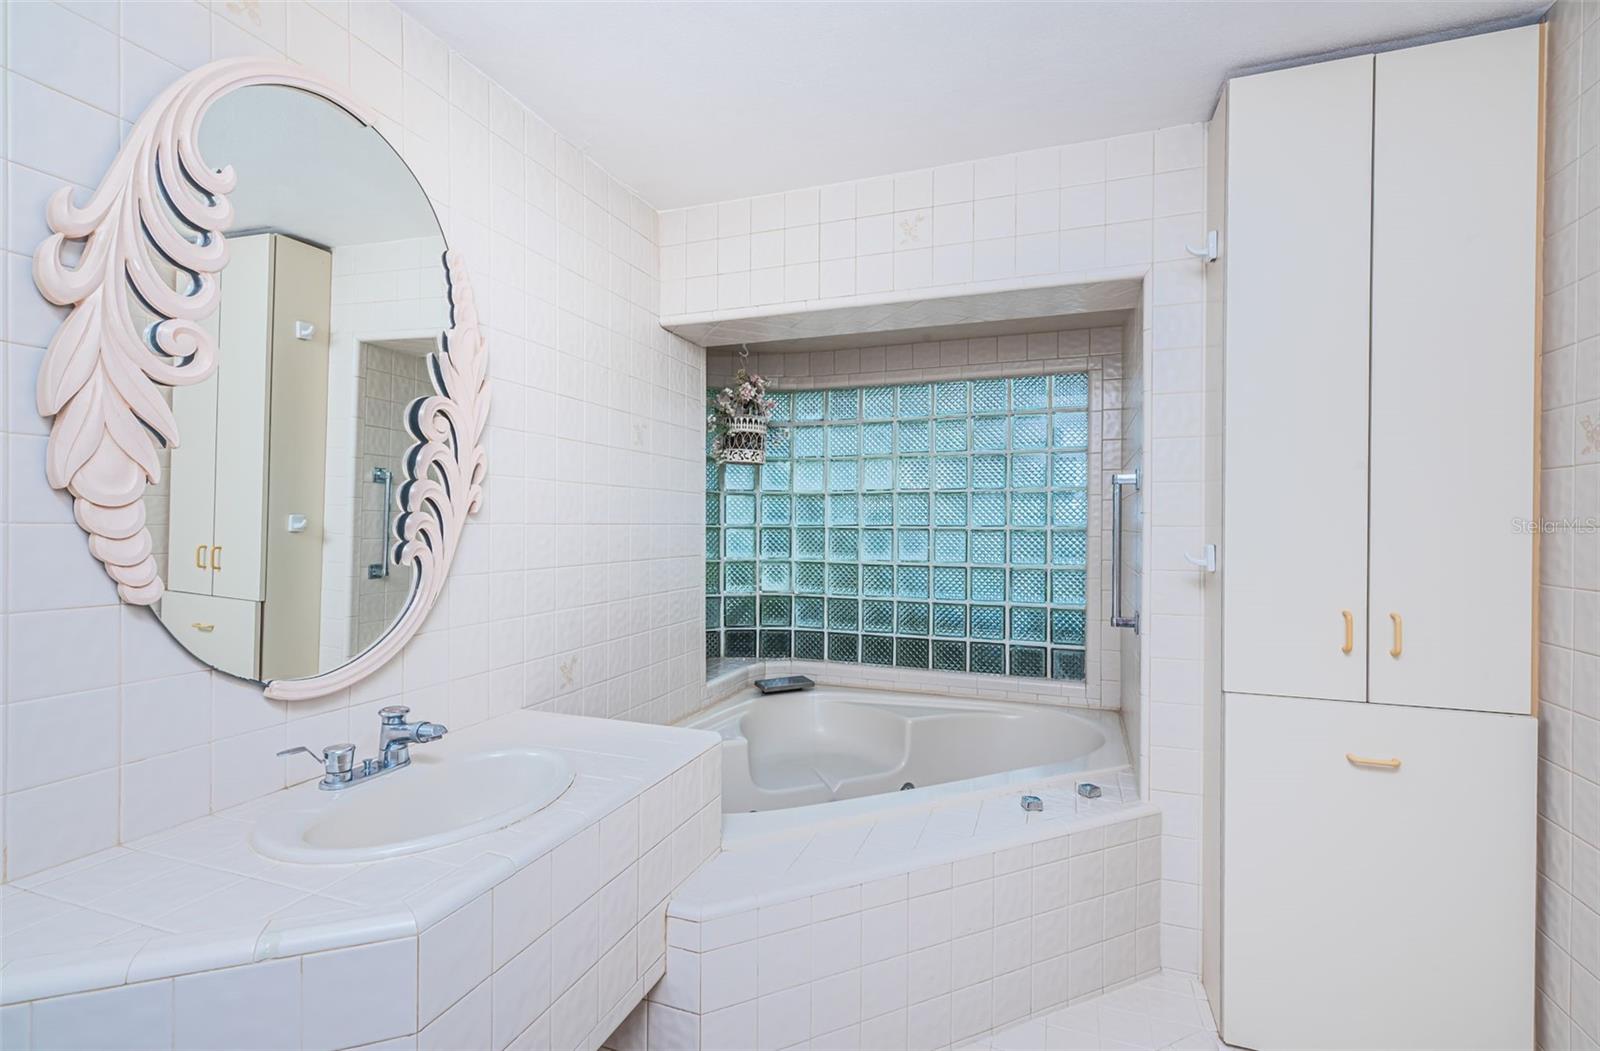 Experience luxury with an elevated jacuzzi in the master bathroom of this property! This elevated feature adds a touch of indulgence to your private retreat, providing a perfect spot to unwind and relax.